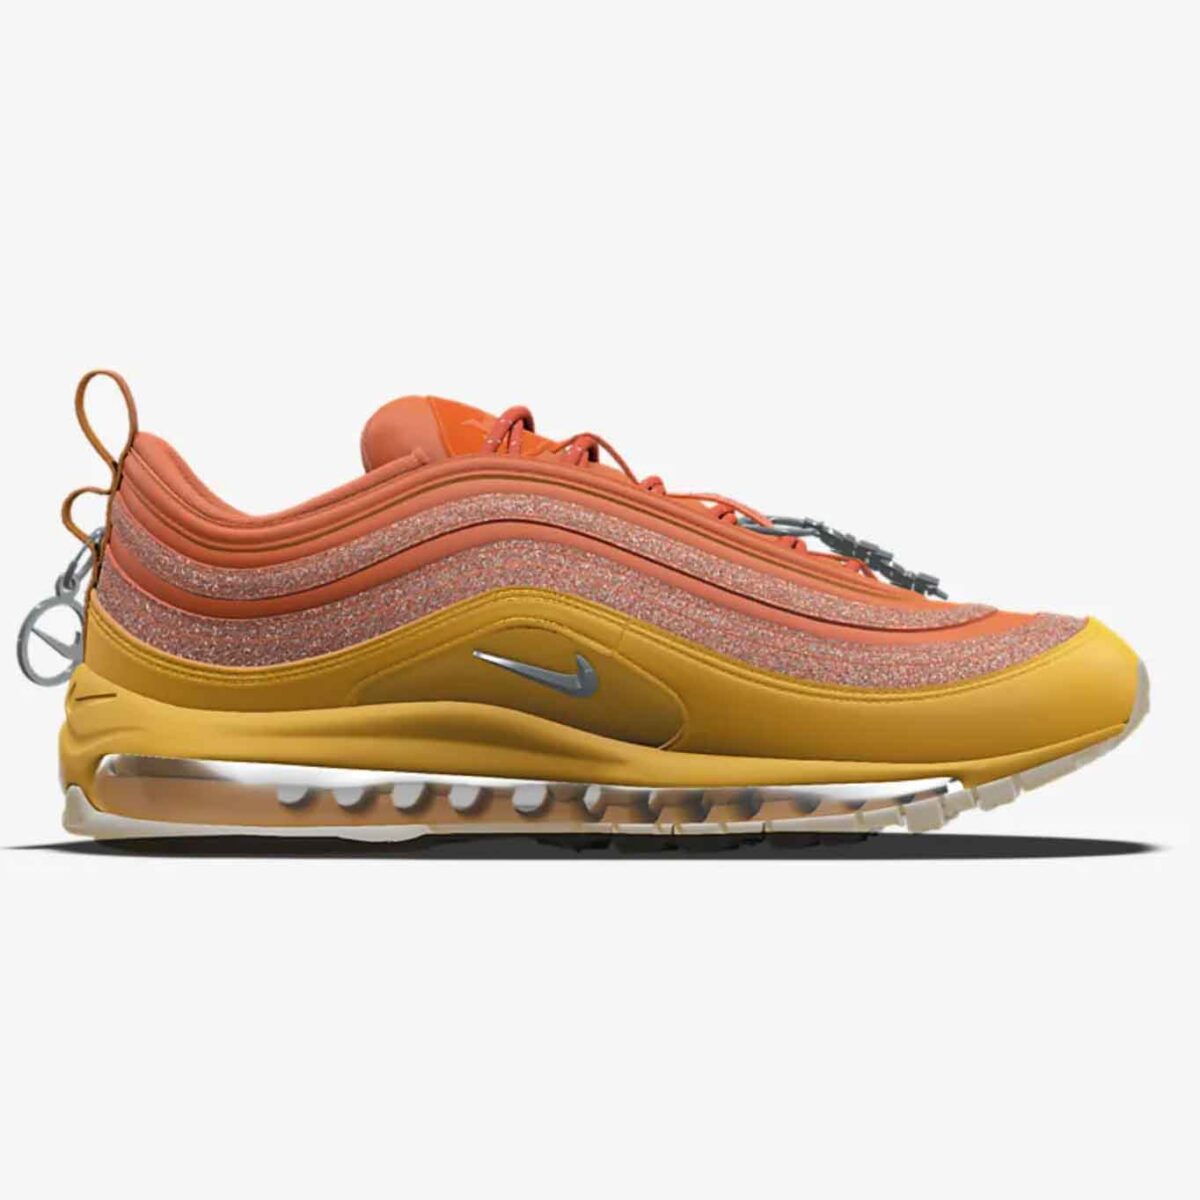 megan thee stallion nike air max 97 something for thee hotties by you fz4048 900 3 1200x1200